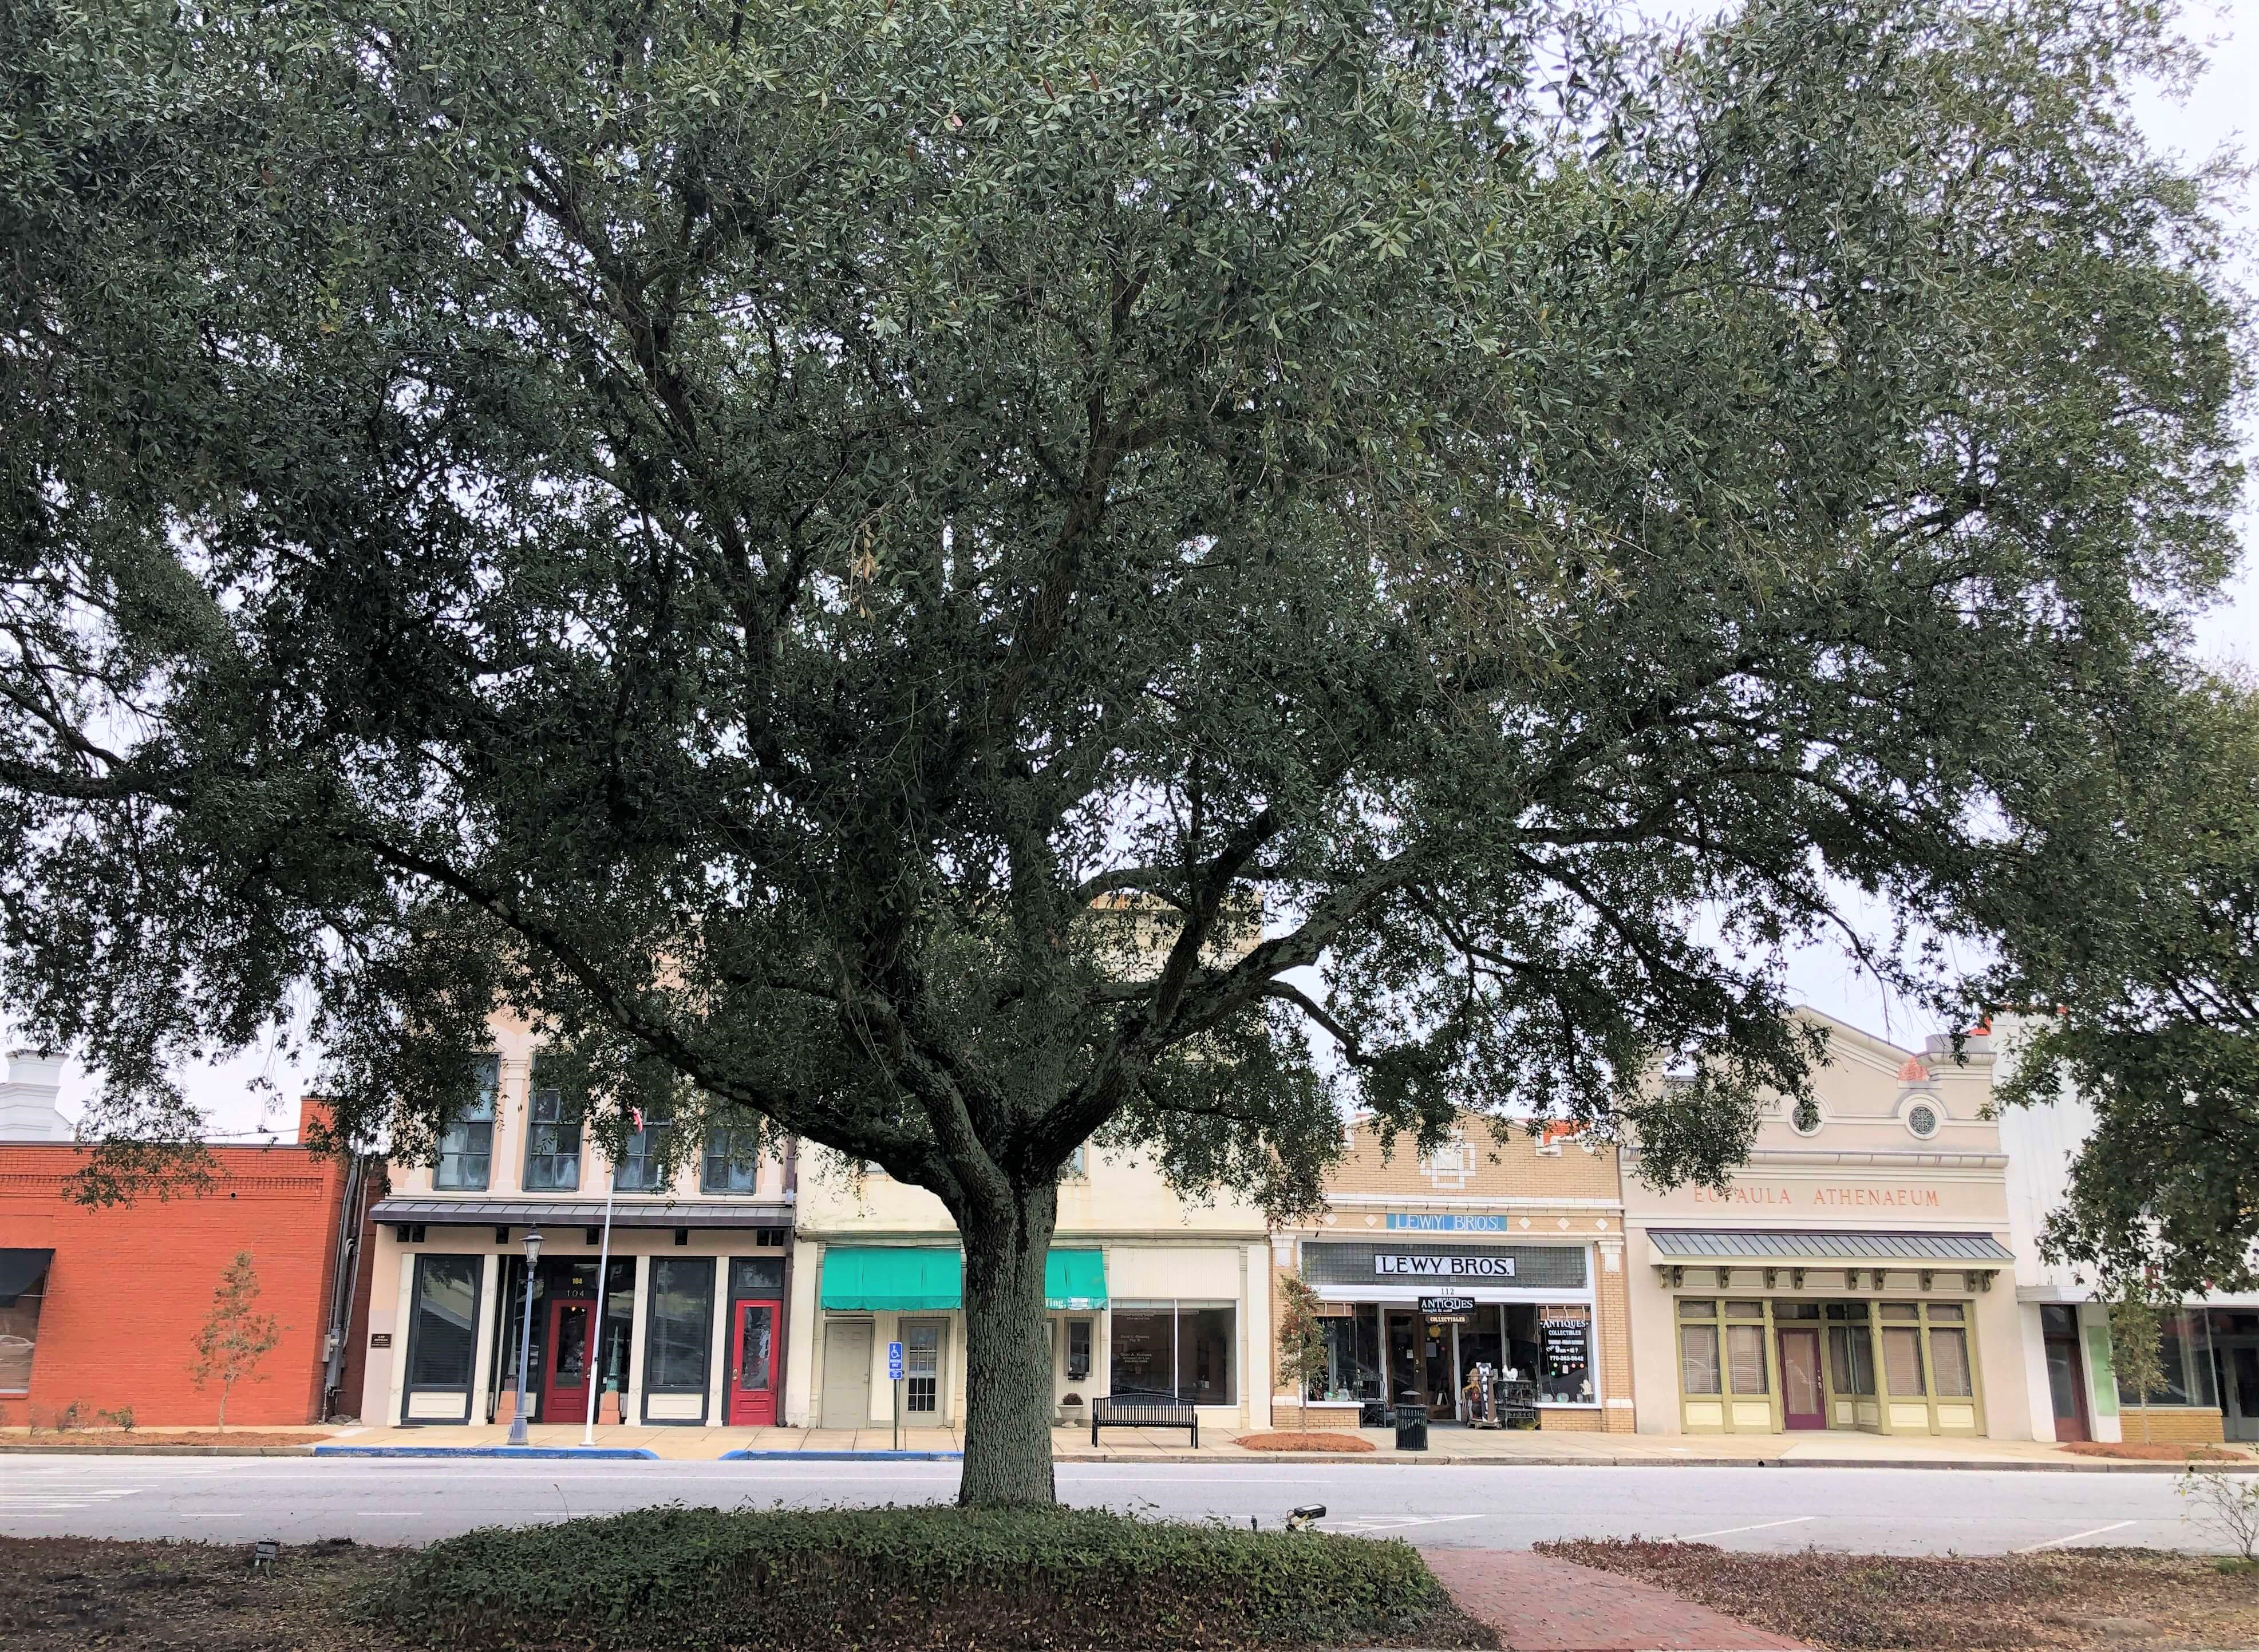 historical storefronts of Eufaula, Alabama behind a large tree in the center of the street